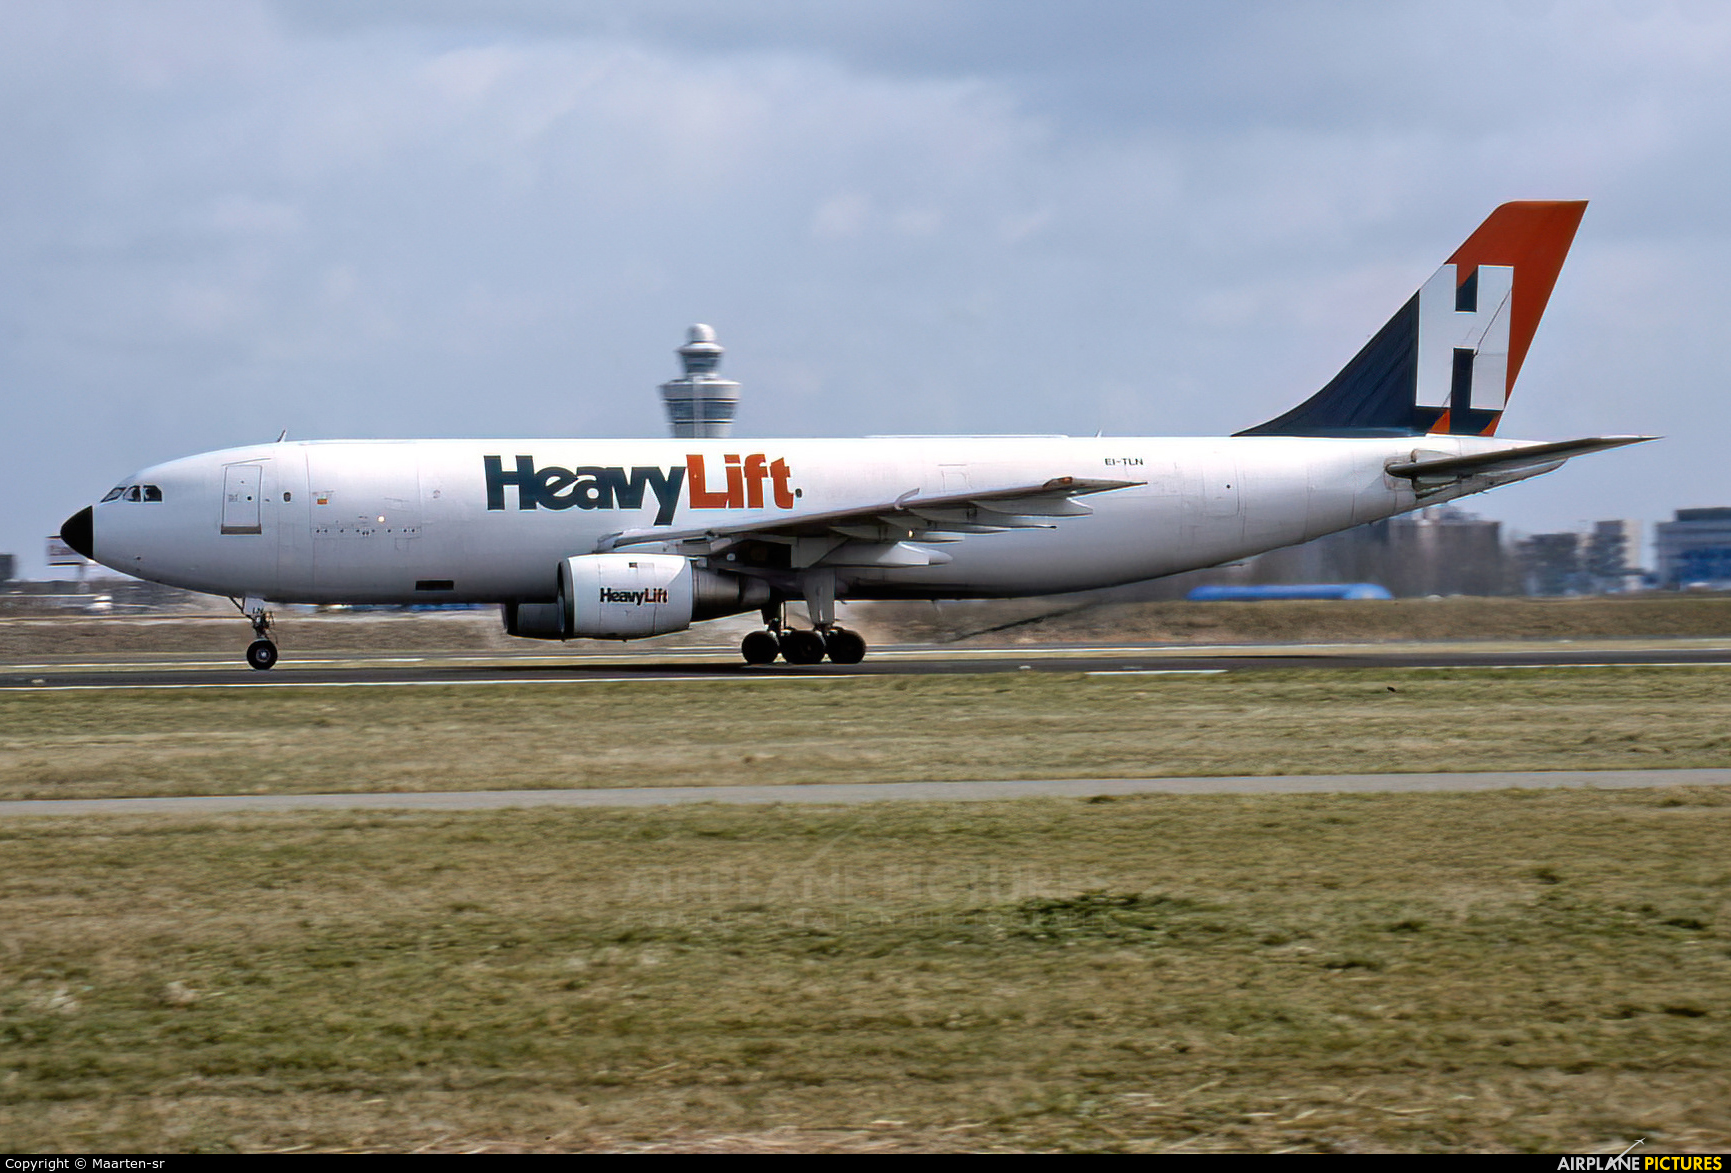 HeavyLift Cargo Airlines EI-TLN aircraft at Amsterdam - Schiphol